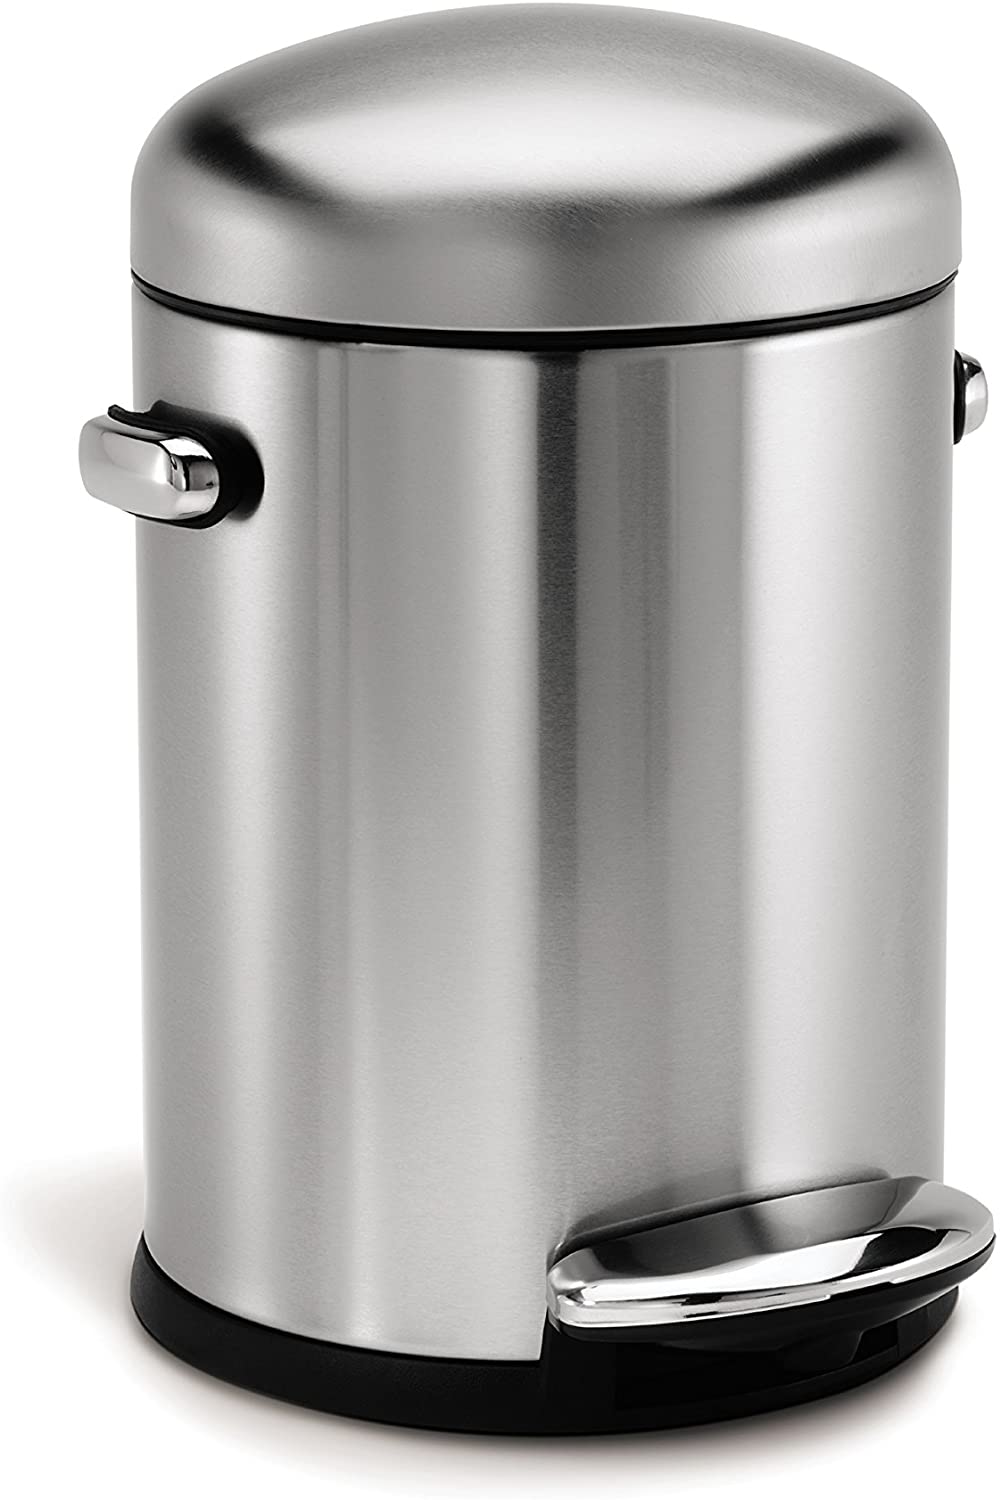 Simplehuman-Round-Retro-Pedal-Bin-Brushed-Stainless-Steel-4.5L